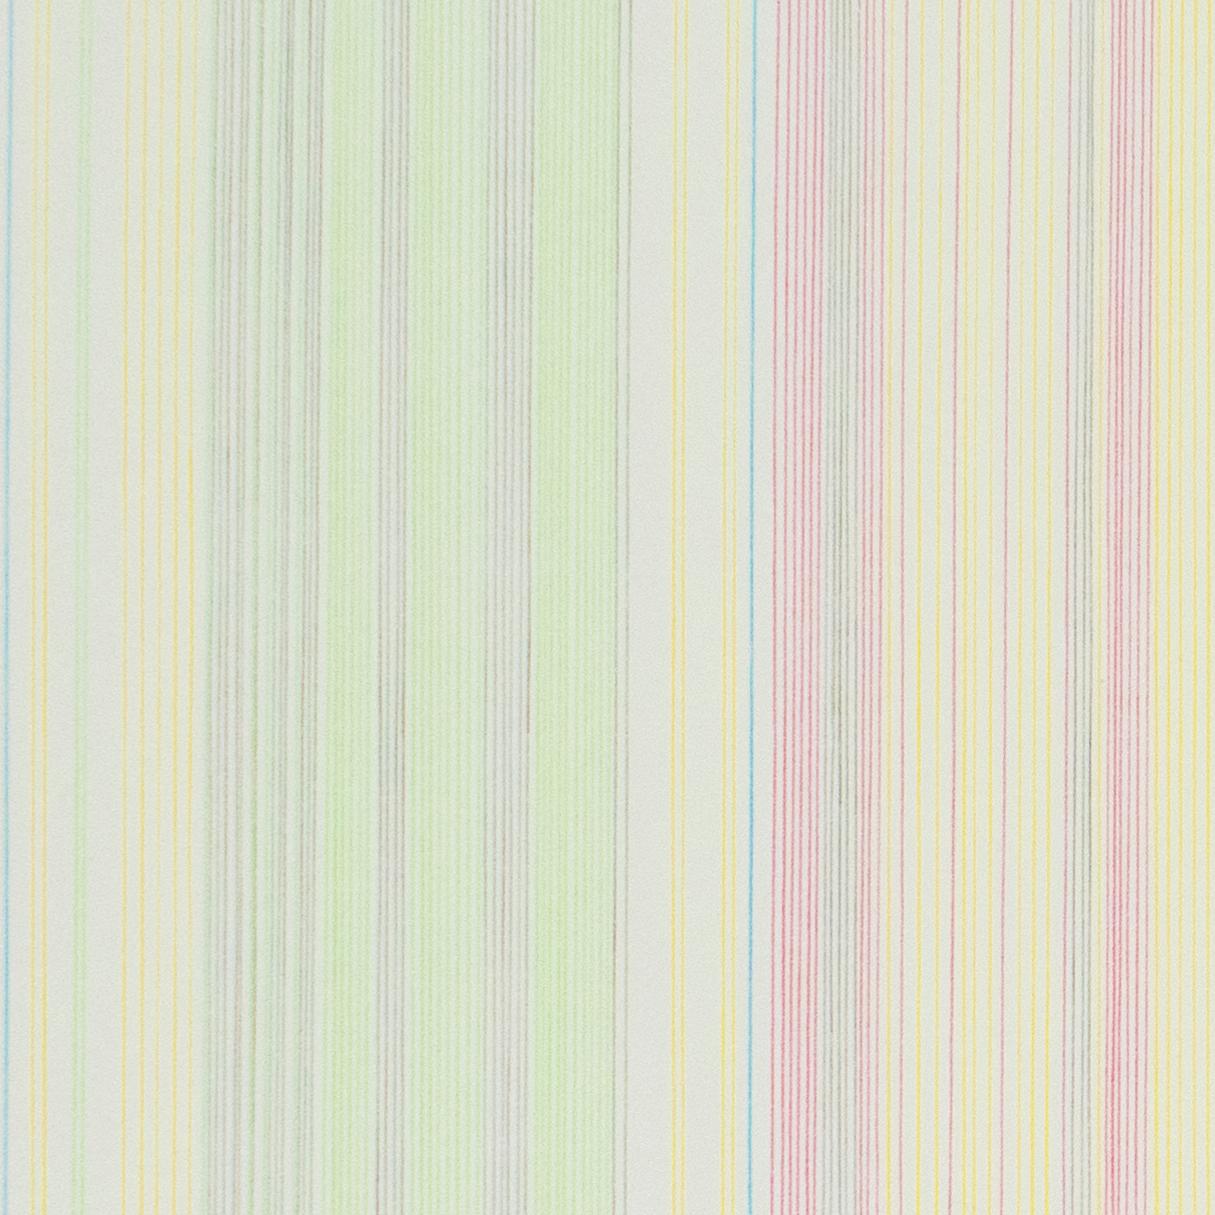 Tightrope: abstract modern minimalist color field drawing with rainbow colors - Print by Gene Davis